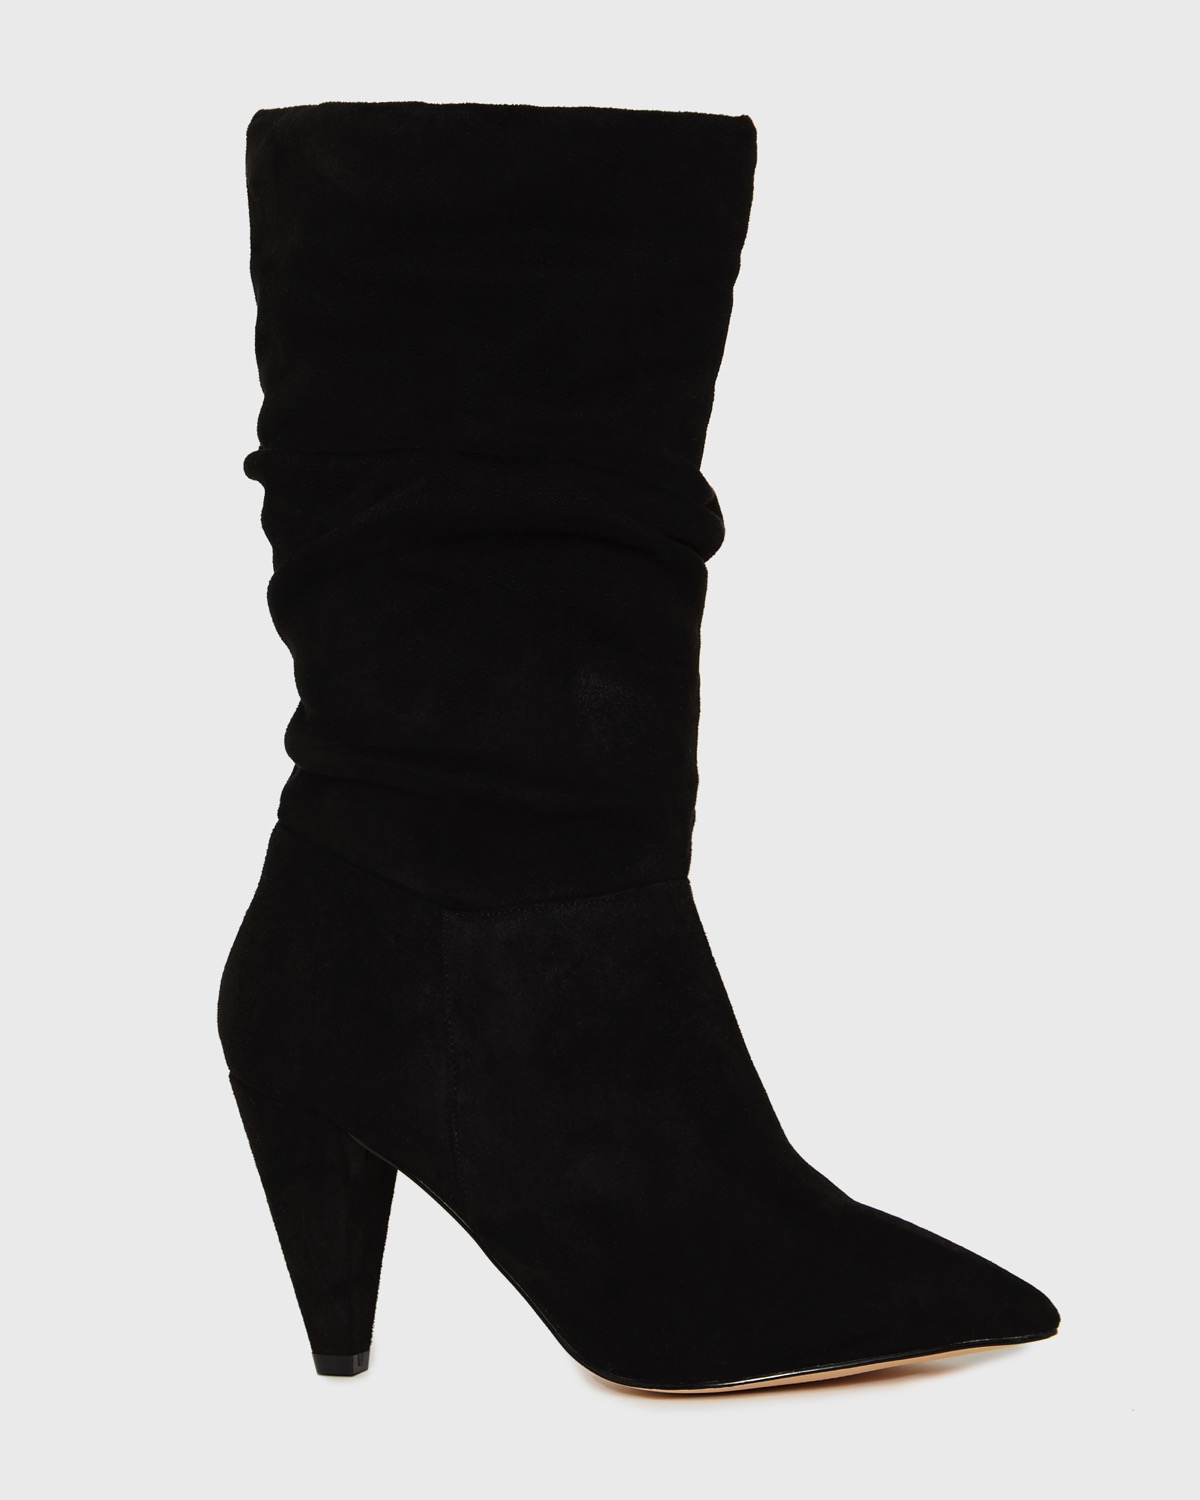 next black slouch boots